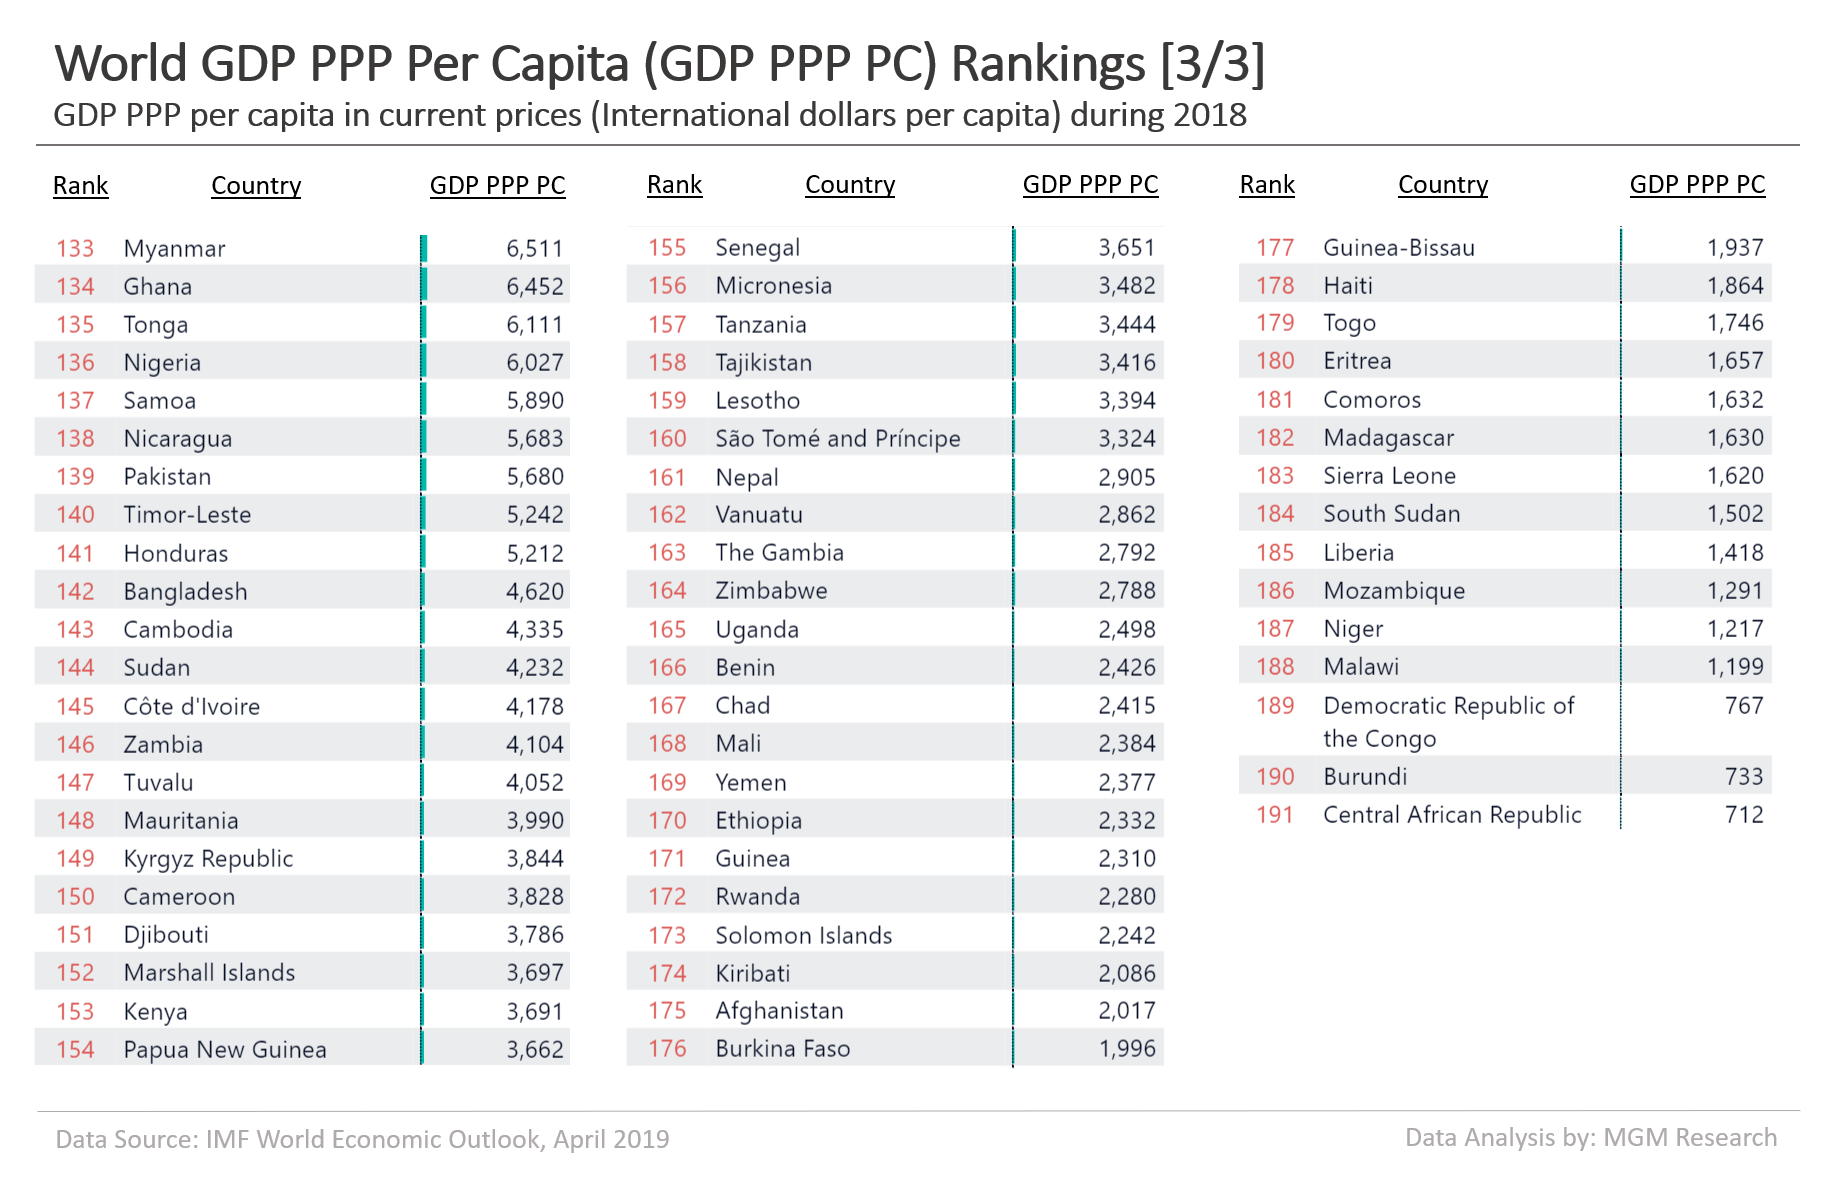 World GDP PPP PC Rankings 3 of 3